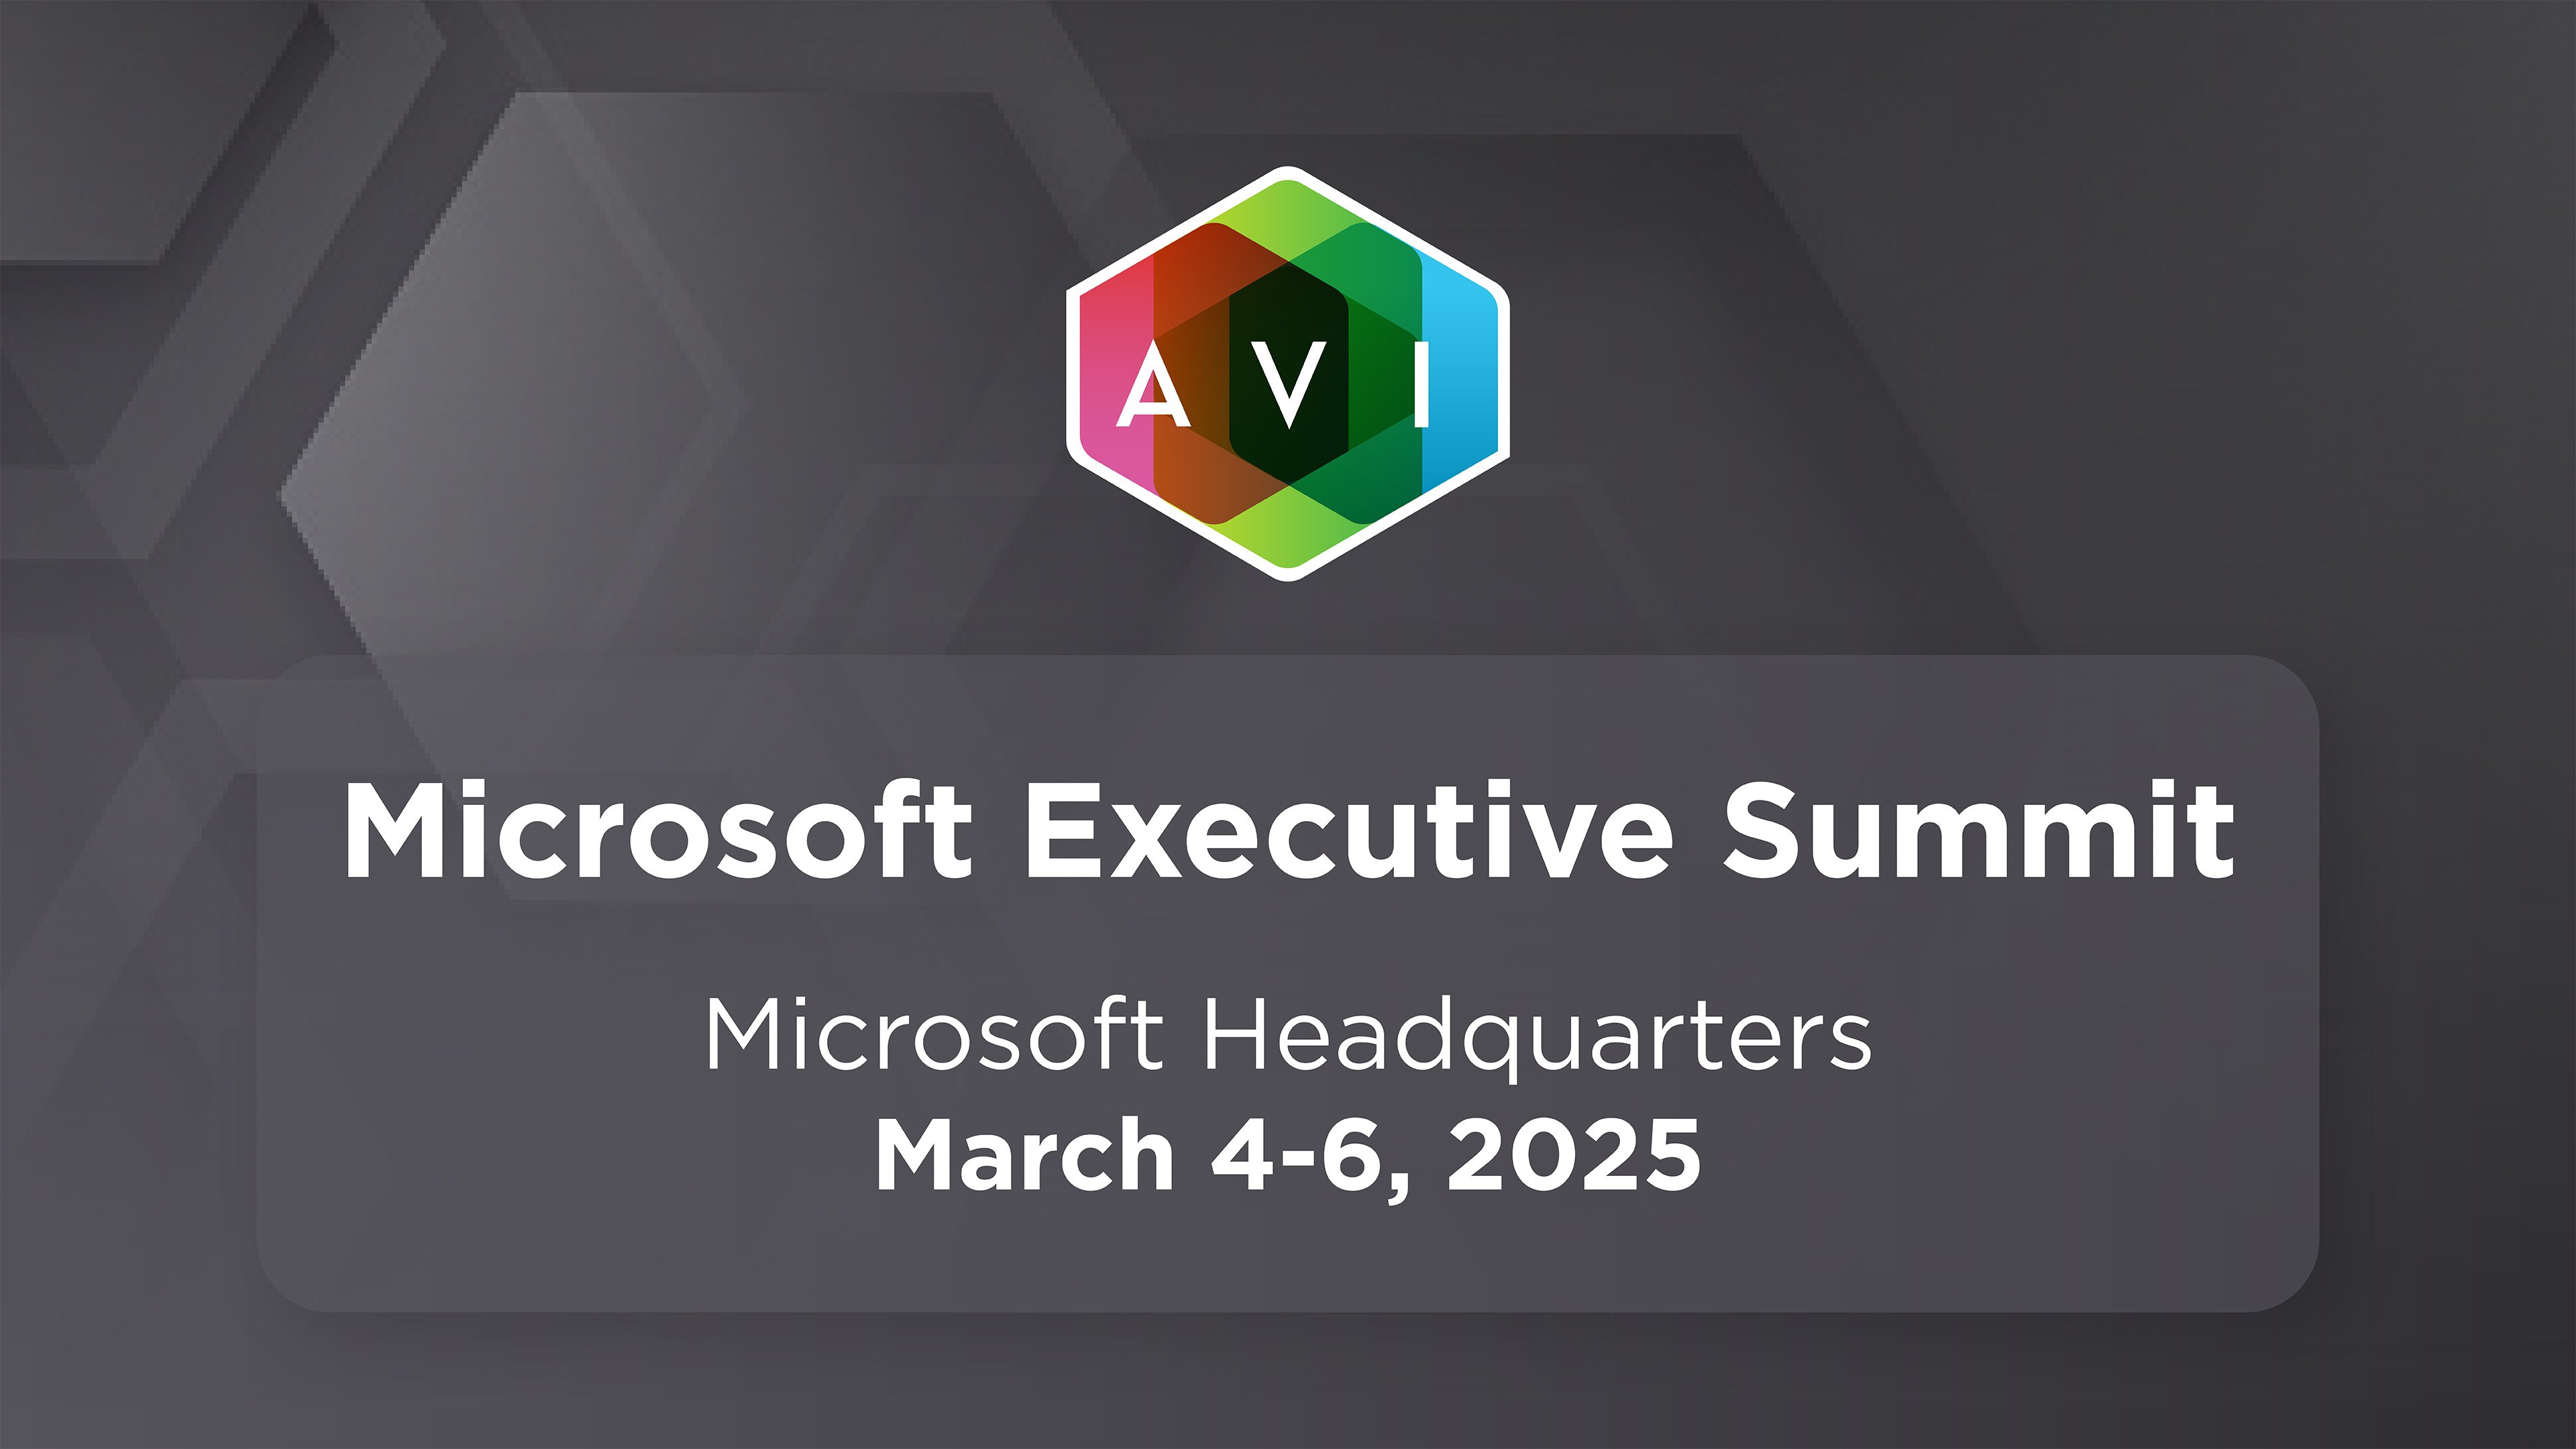 Image{width=3840,height=2160,url='https://www.avisystems.com/hubfs/events/additional-events/2024/microsoft-executive-summit-event-page-thumbnail.jpg',altText='microsoft-executive-summit-event-page-thumbnail',fileId=171808181856}